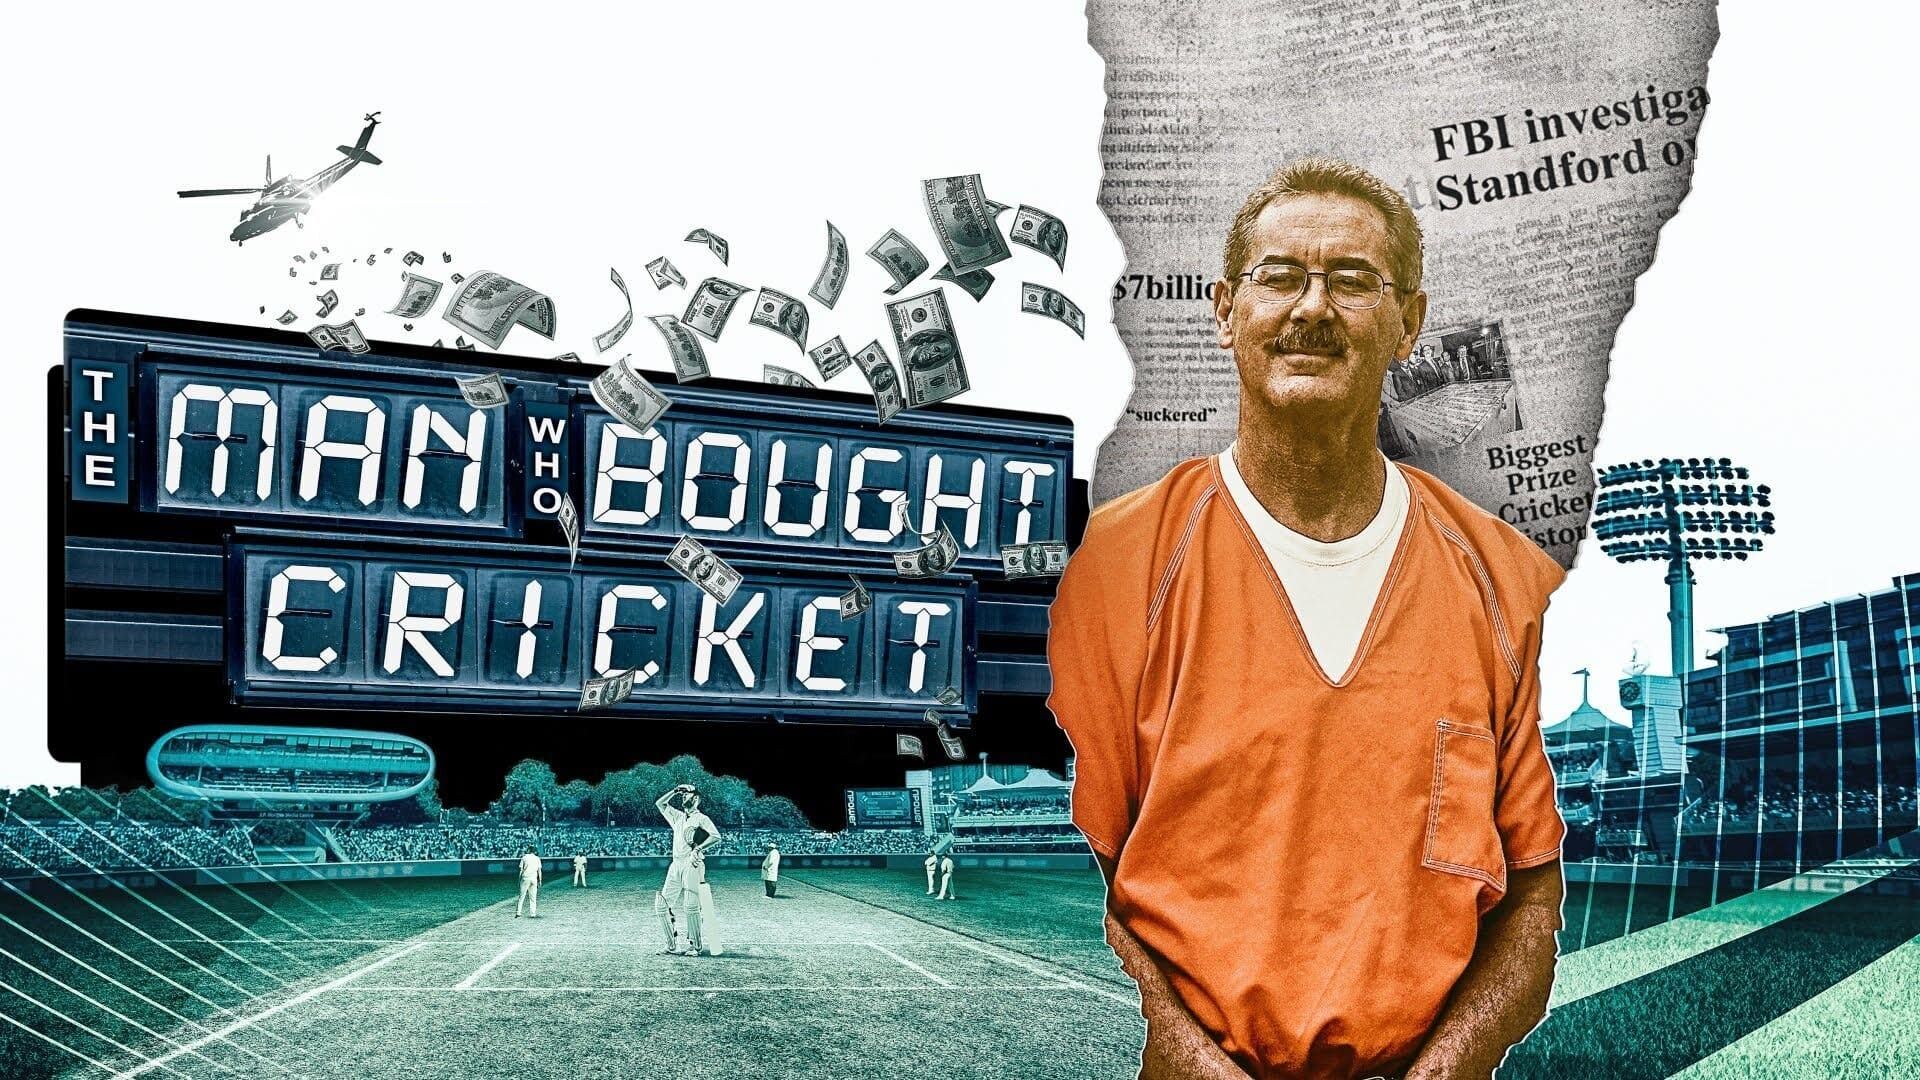 The Man Who Bought Cricket background